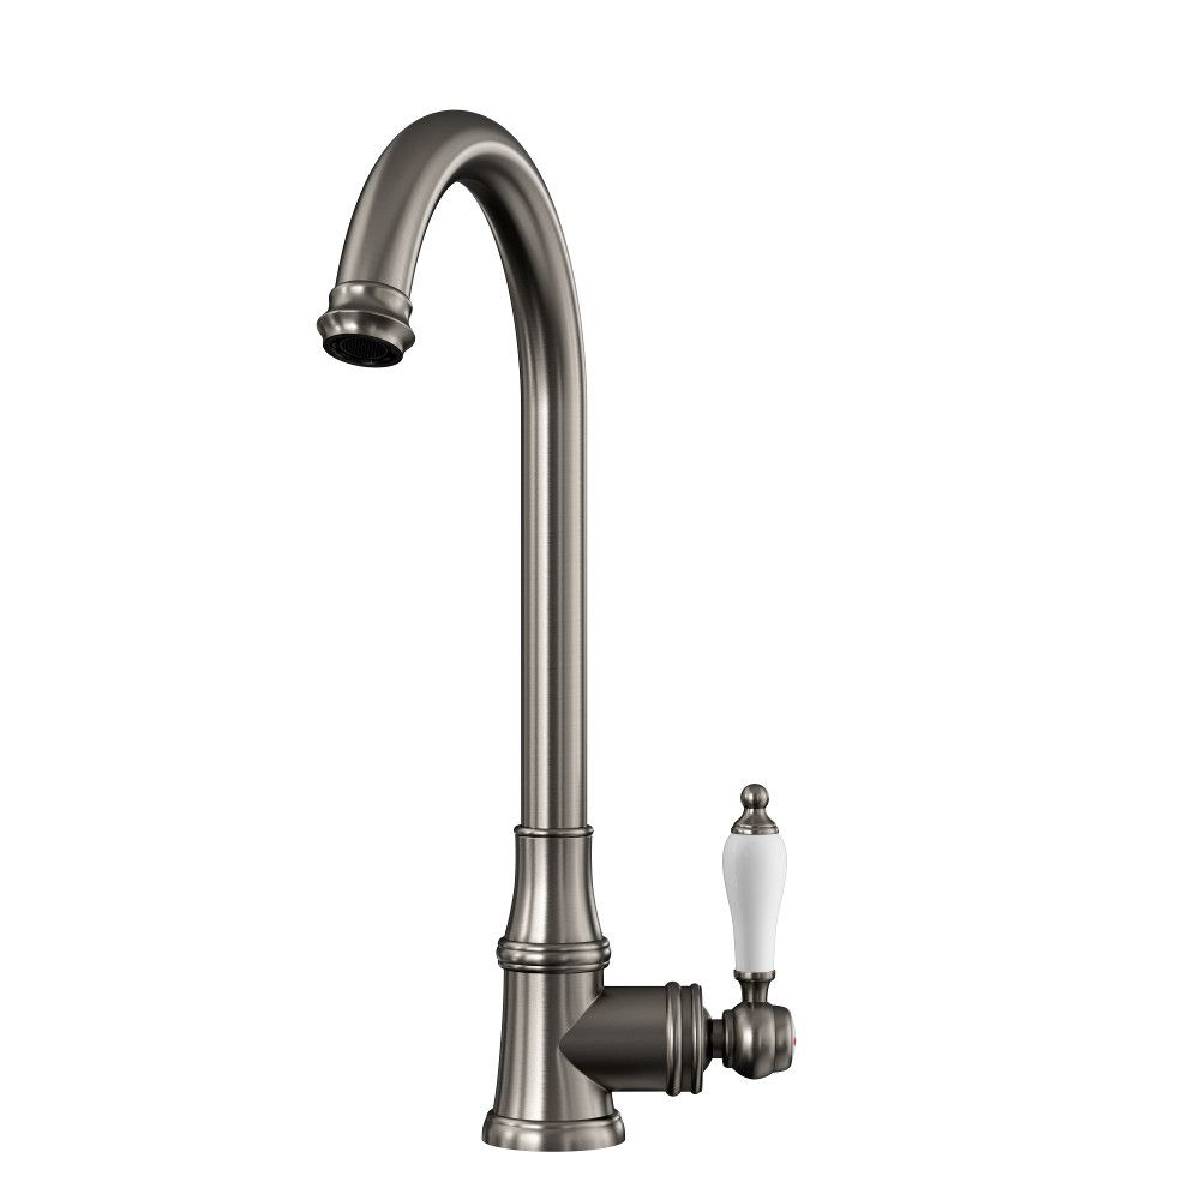 Elect Traditional Style Kitchen Sink Mixer with Swivel Spout & Single Lever - Brushed Nickel Finish (10956)